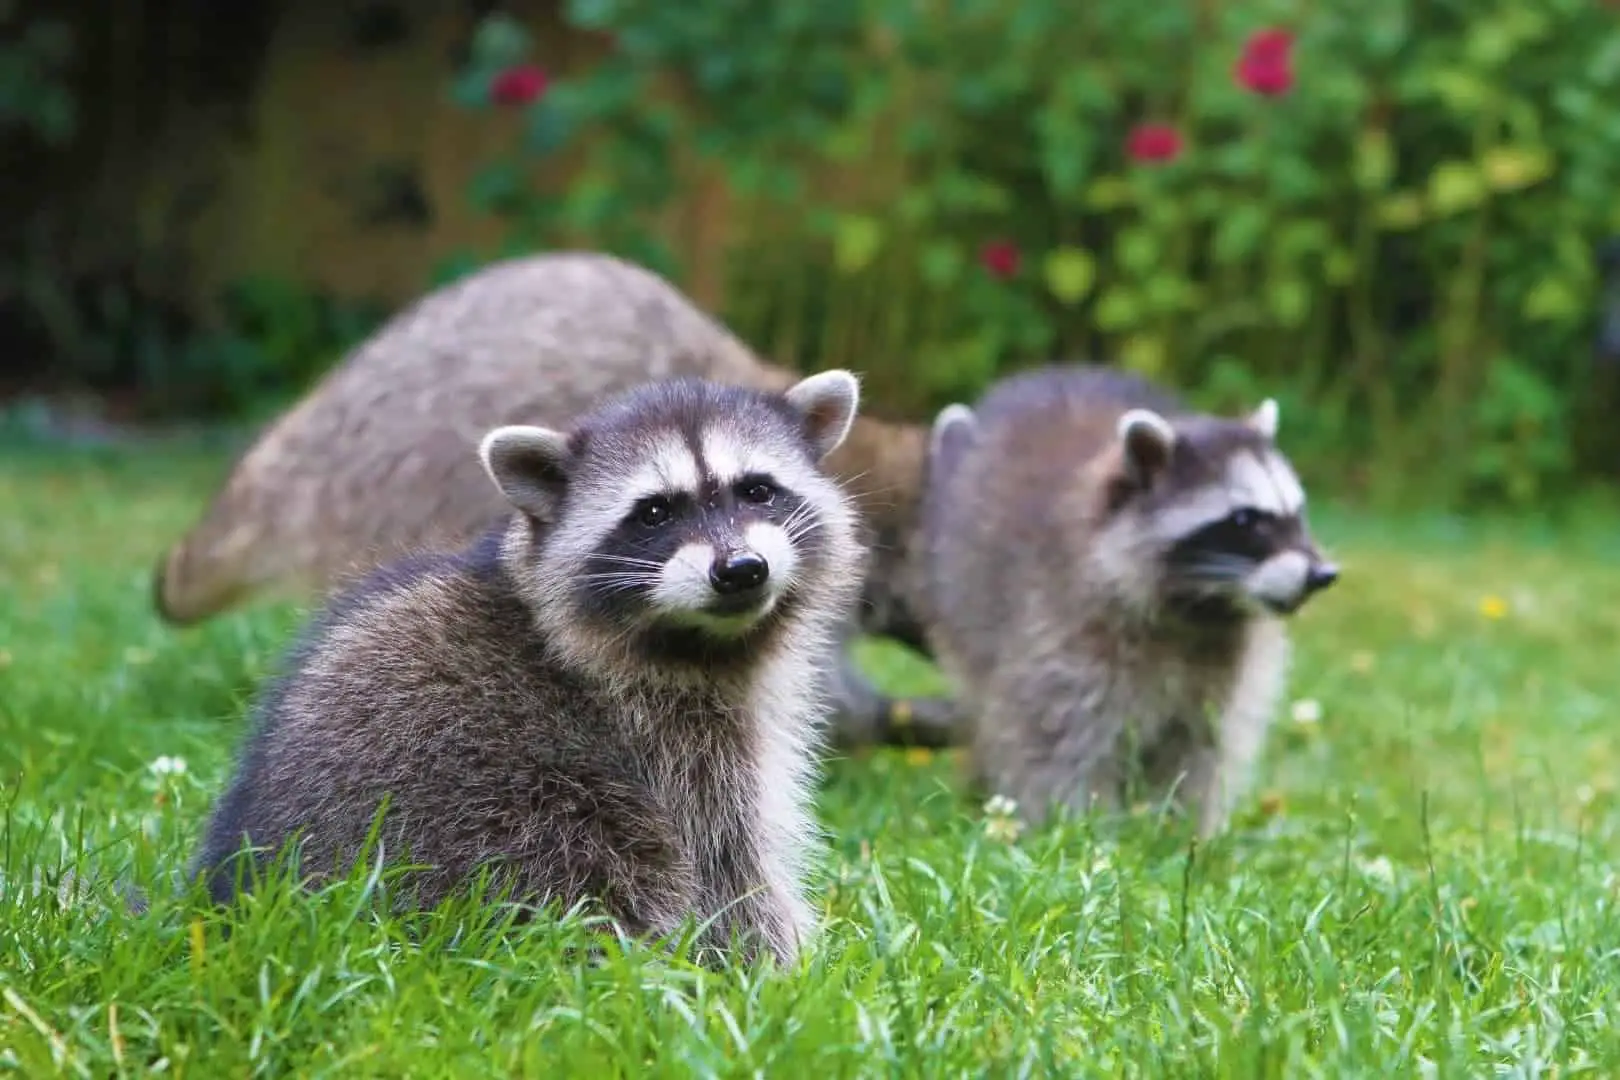 When Do Raccoons Have Babies? / When Are Baby Raccoons Born?